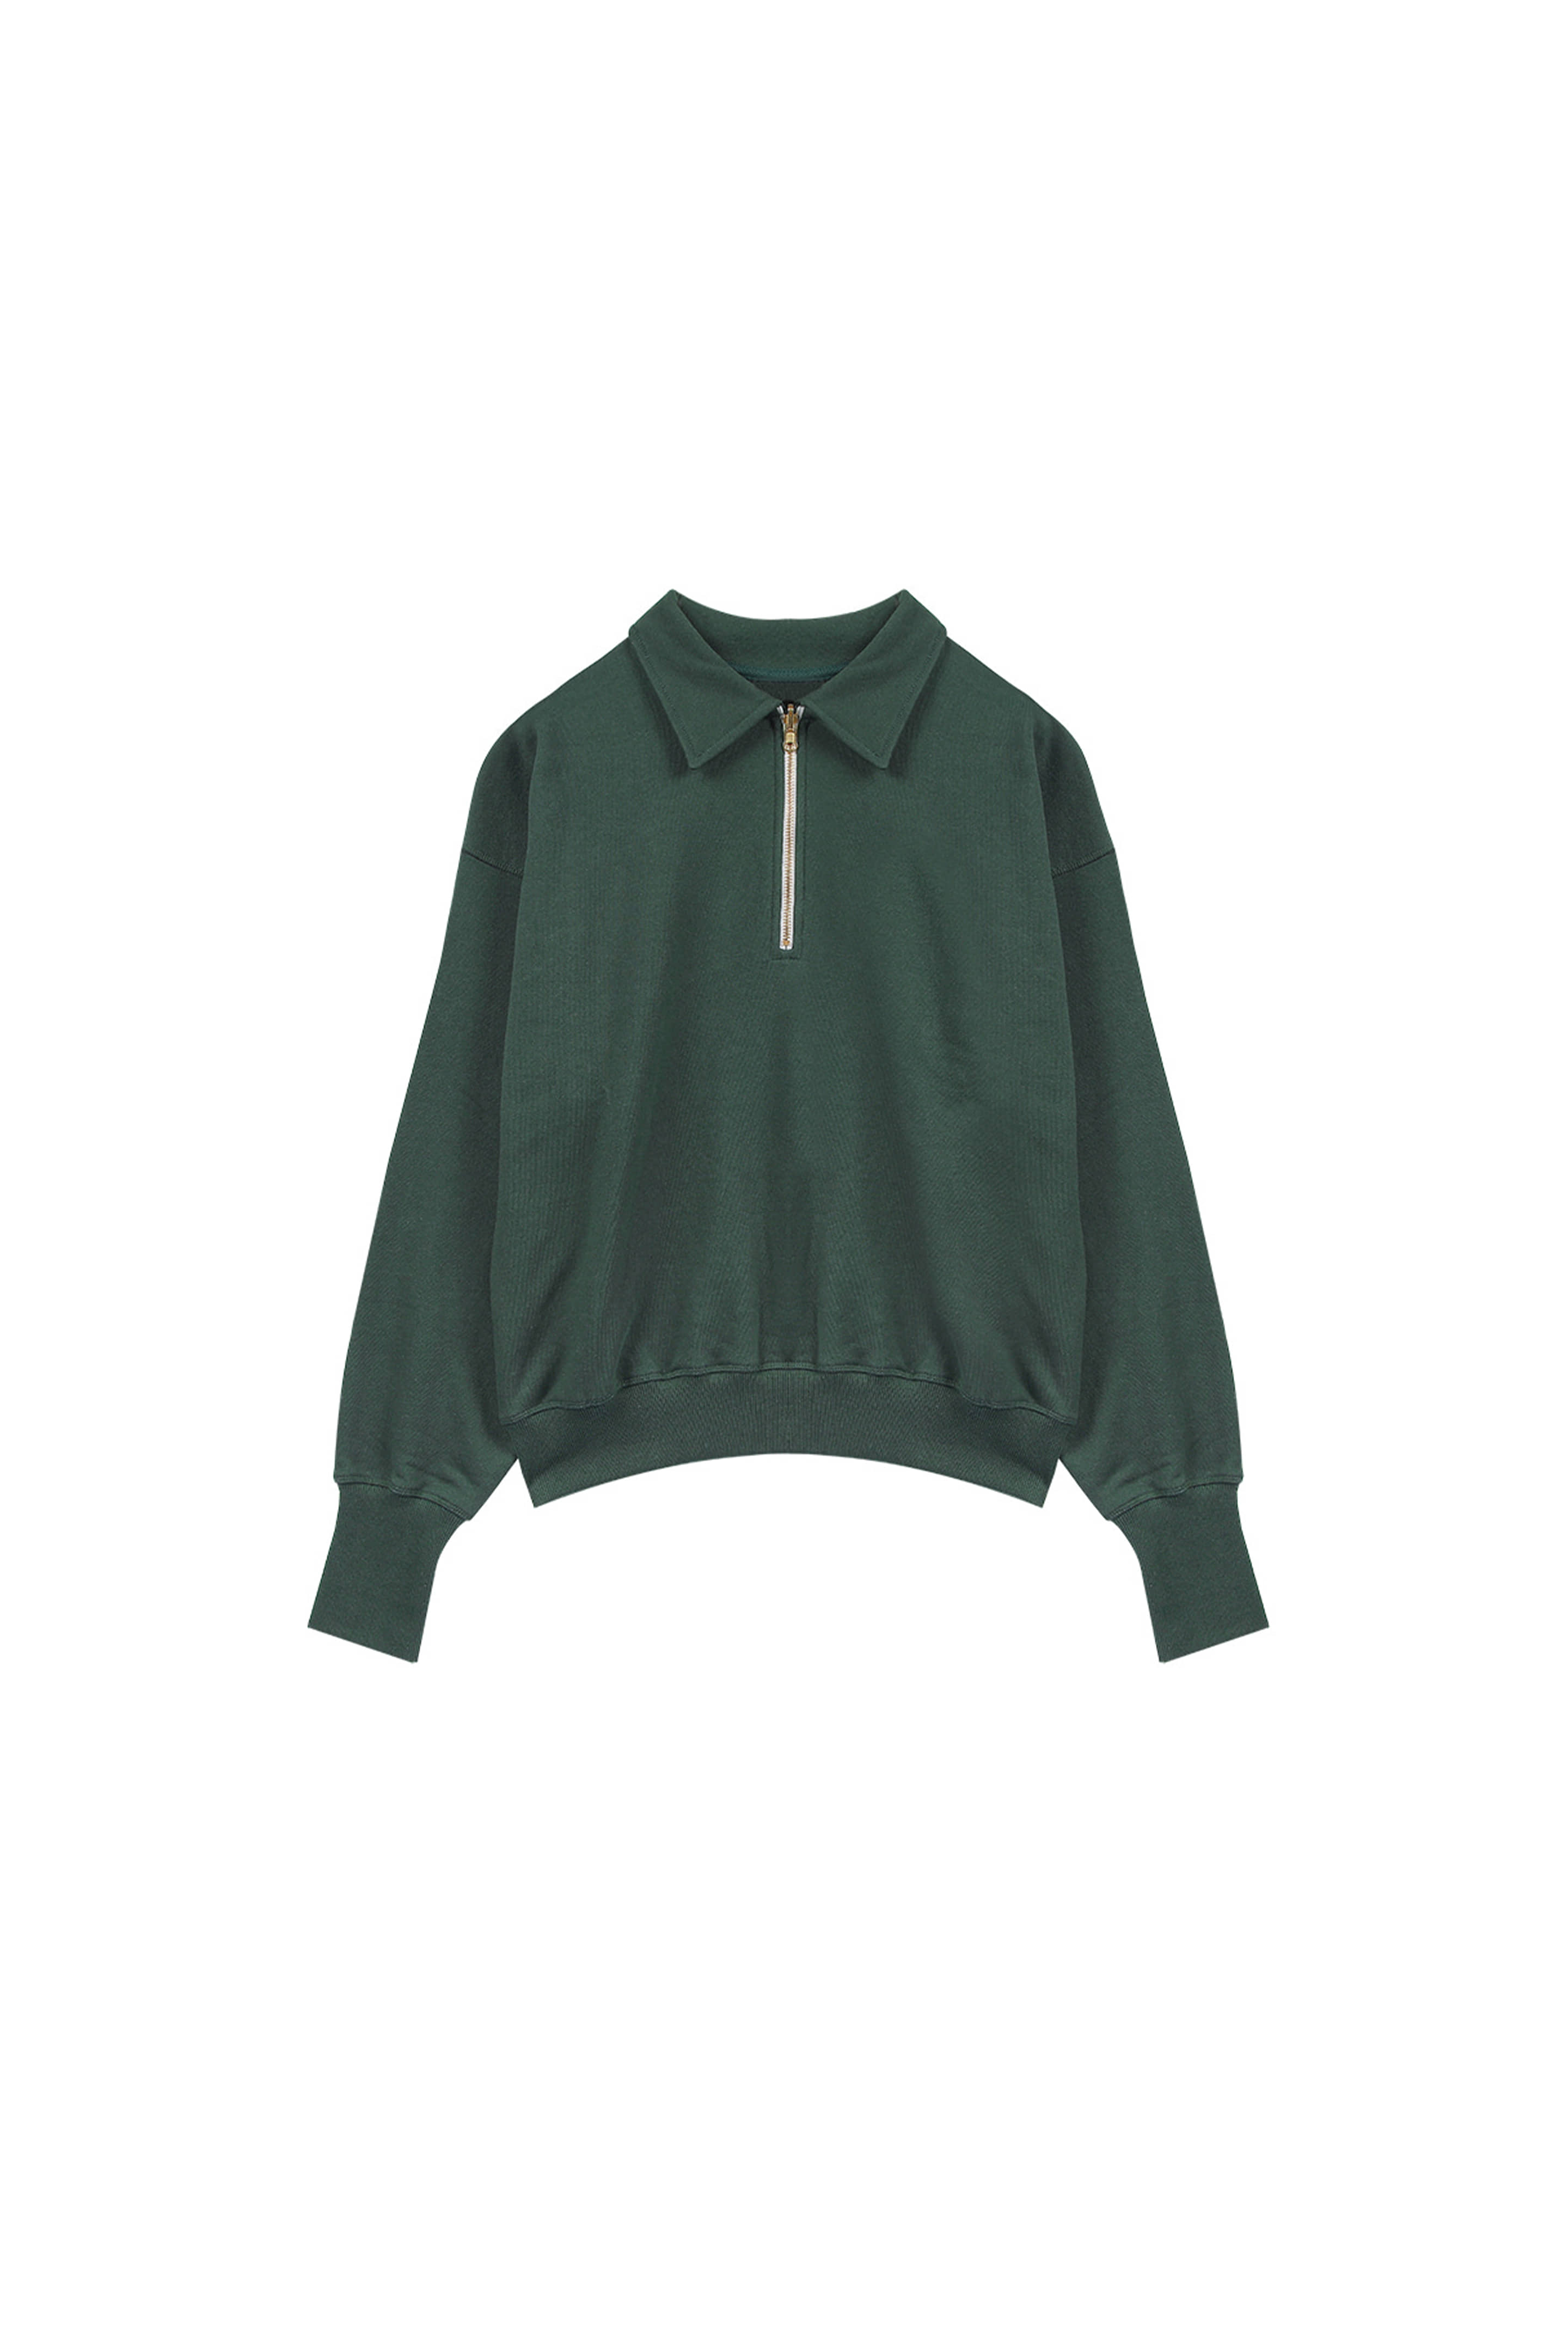 2nd) ORE COTTON 001 zip-up Ever Green